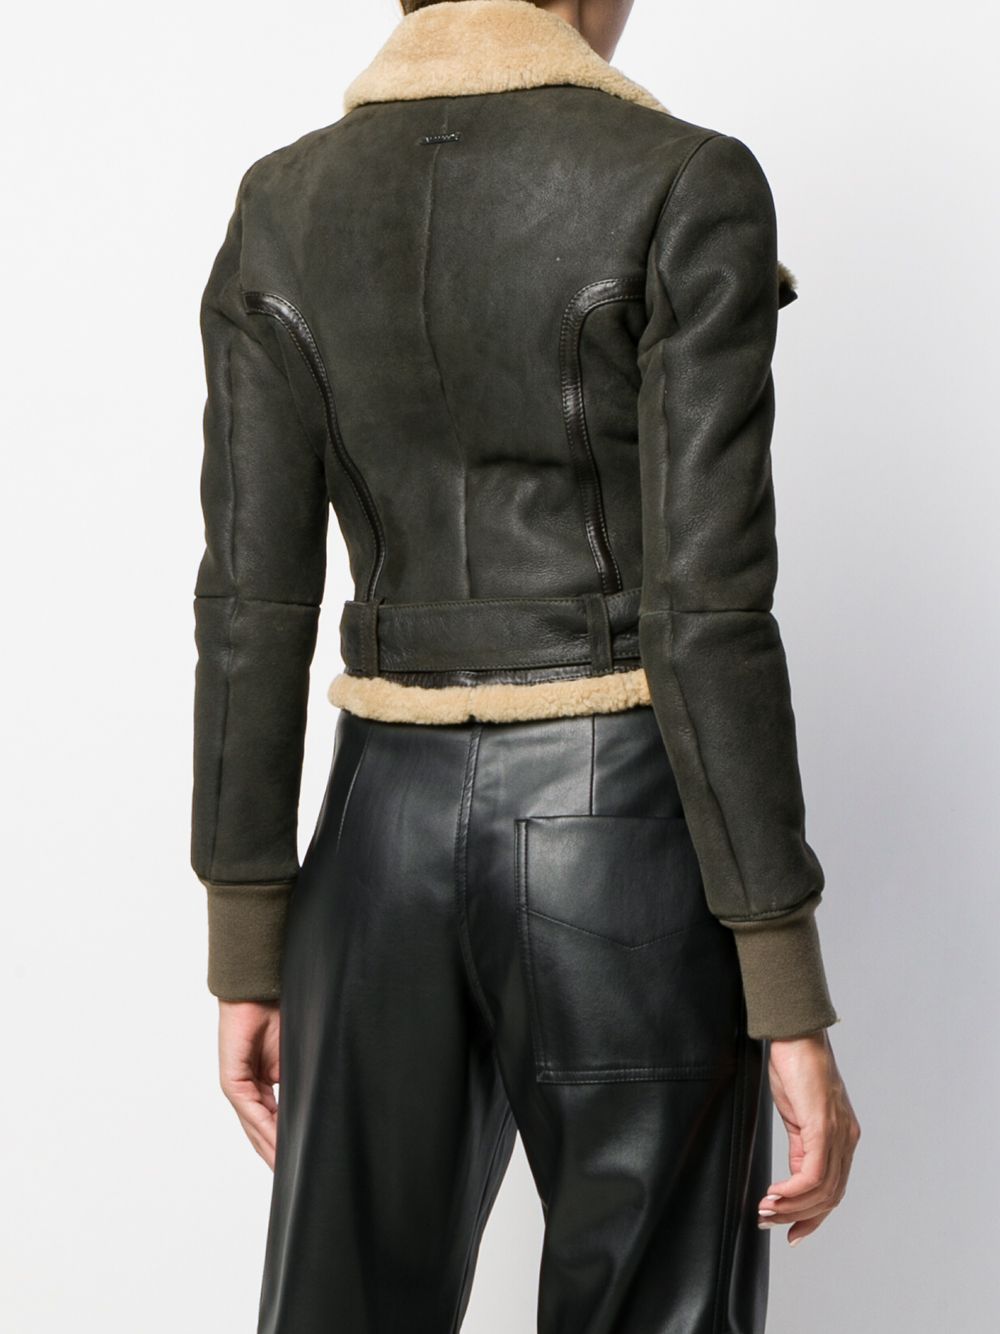 Gianfranco Ferré Pre-Owned 2000s Cropped Belted Leather Jacket - Farfetch